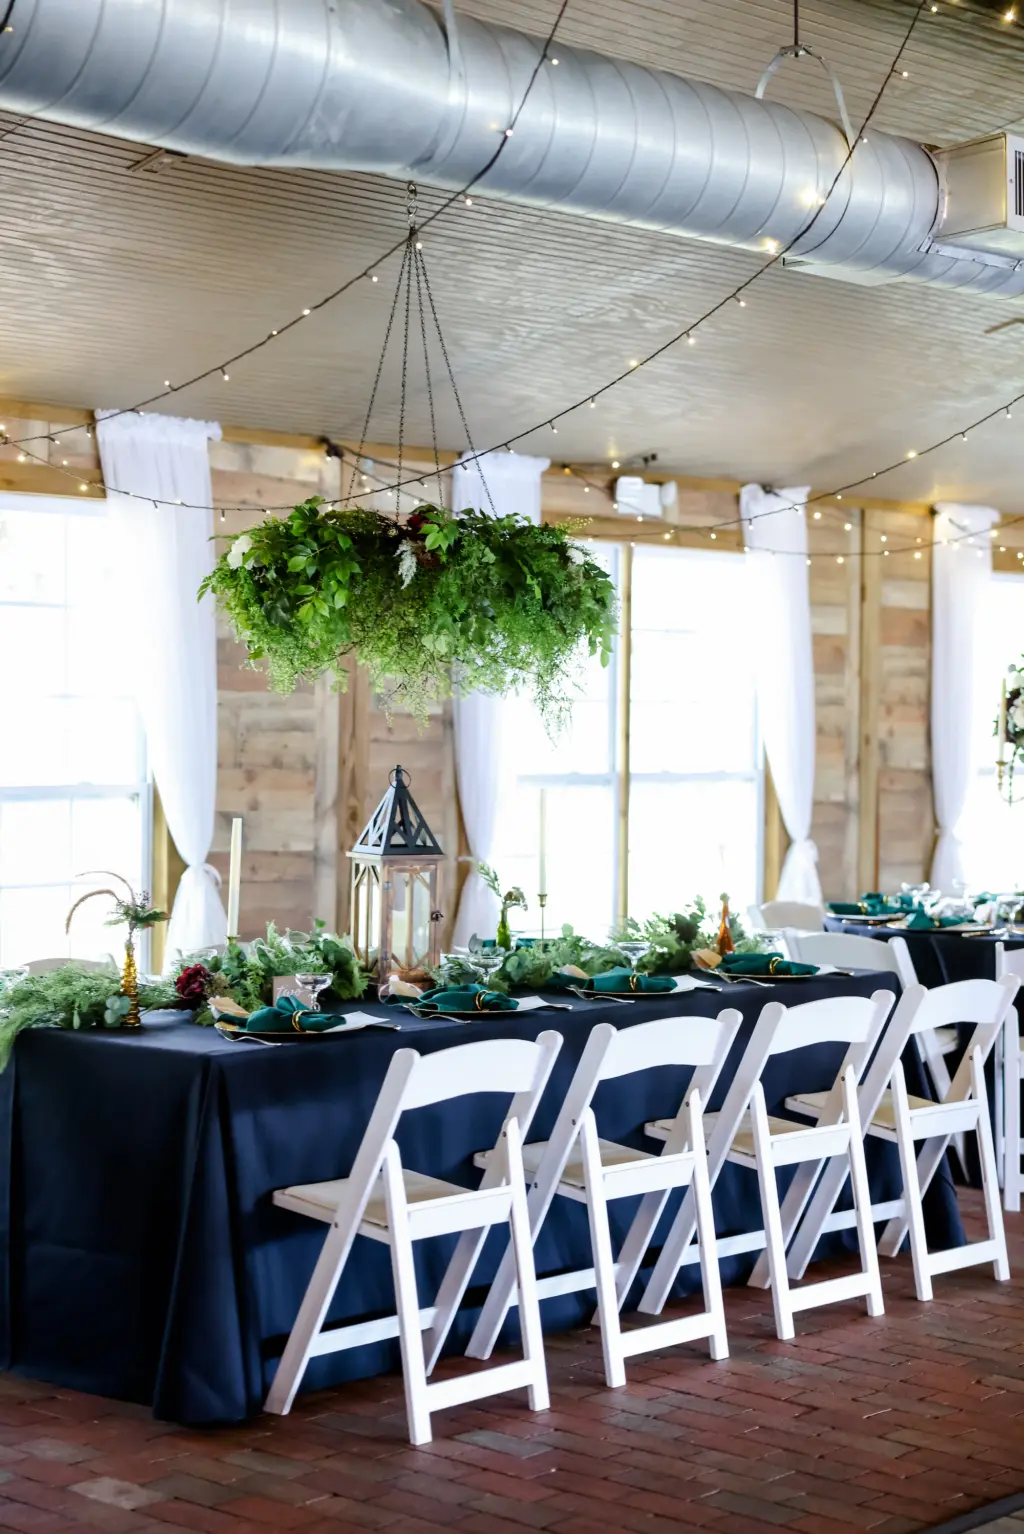 Hanging Greenery Chandelier with Dark Green Linen with White Folding Garden Chairs | Earthy Wedding Reception Inspiration